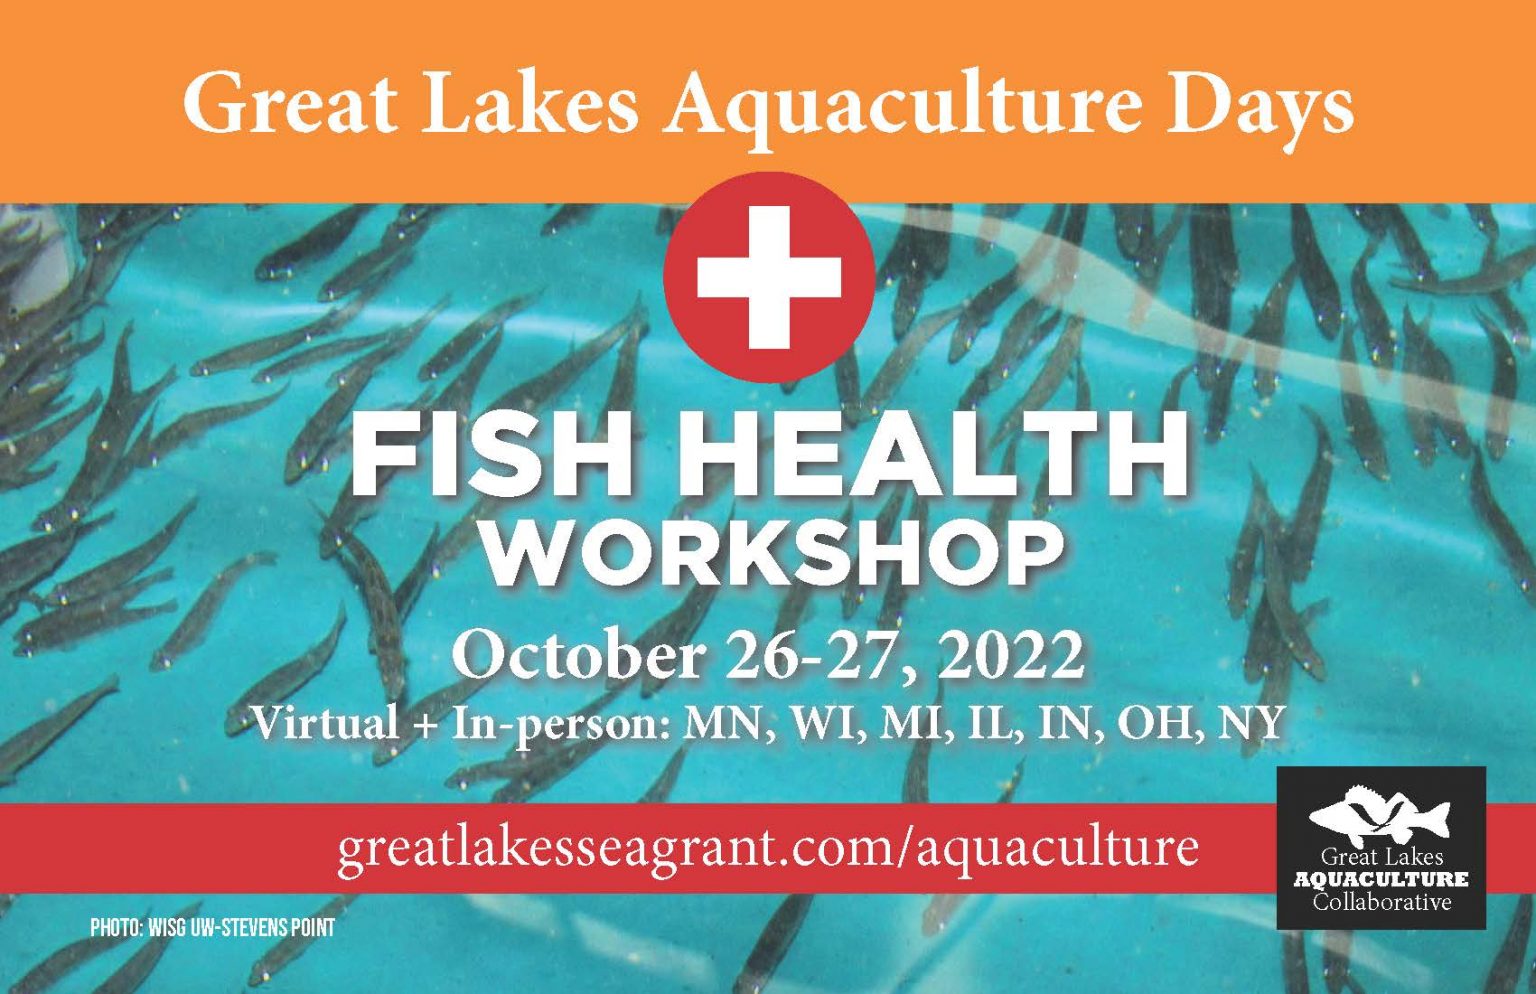 Great Lakes Aquaculture Days to focus on fish health Wisconsin Sea Grant